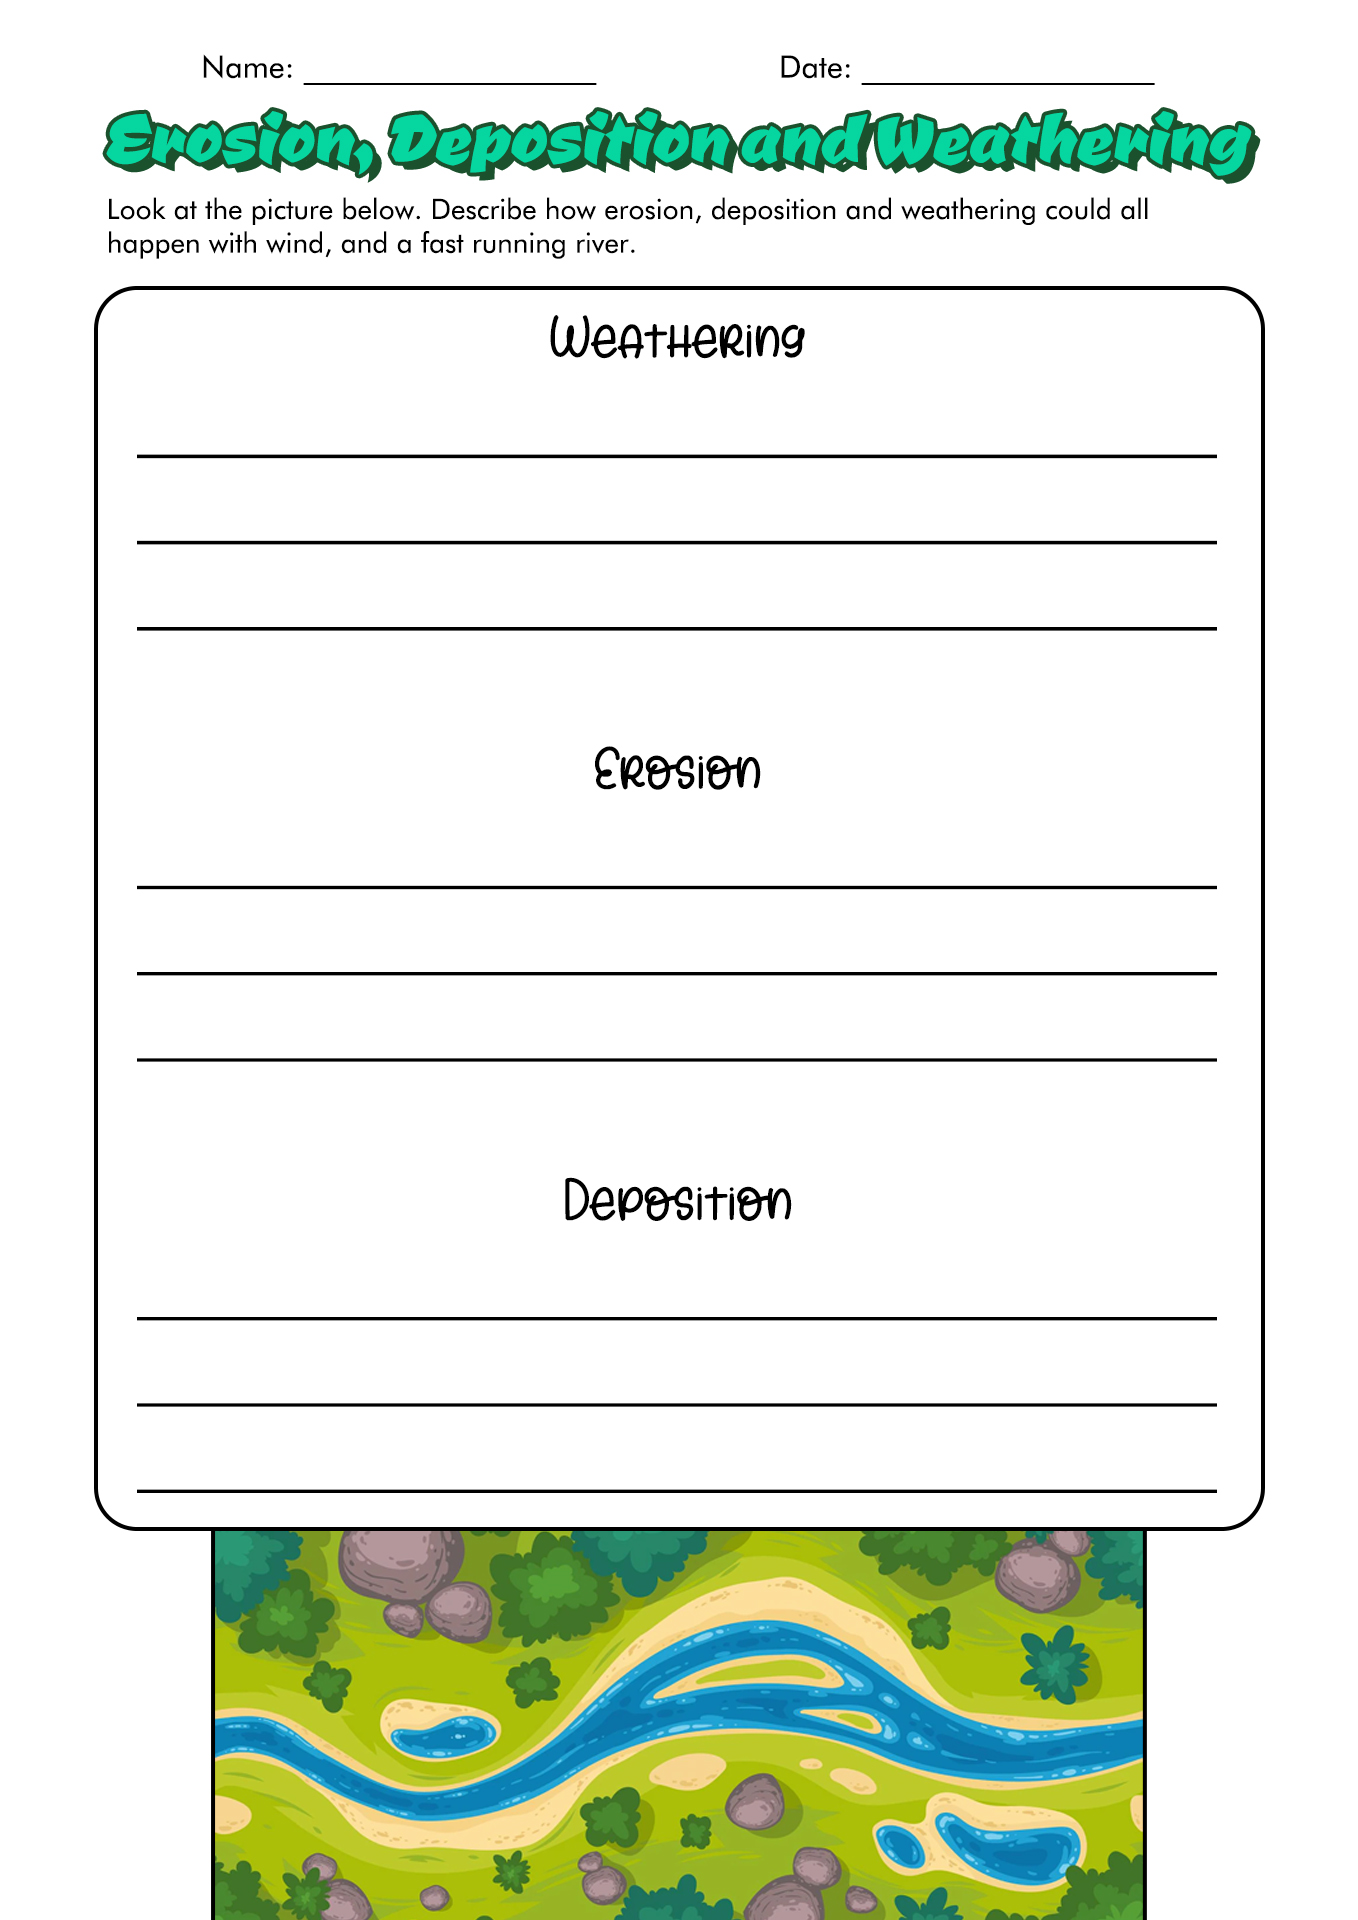 Weathering and Erosion Worksheets Science Image